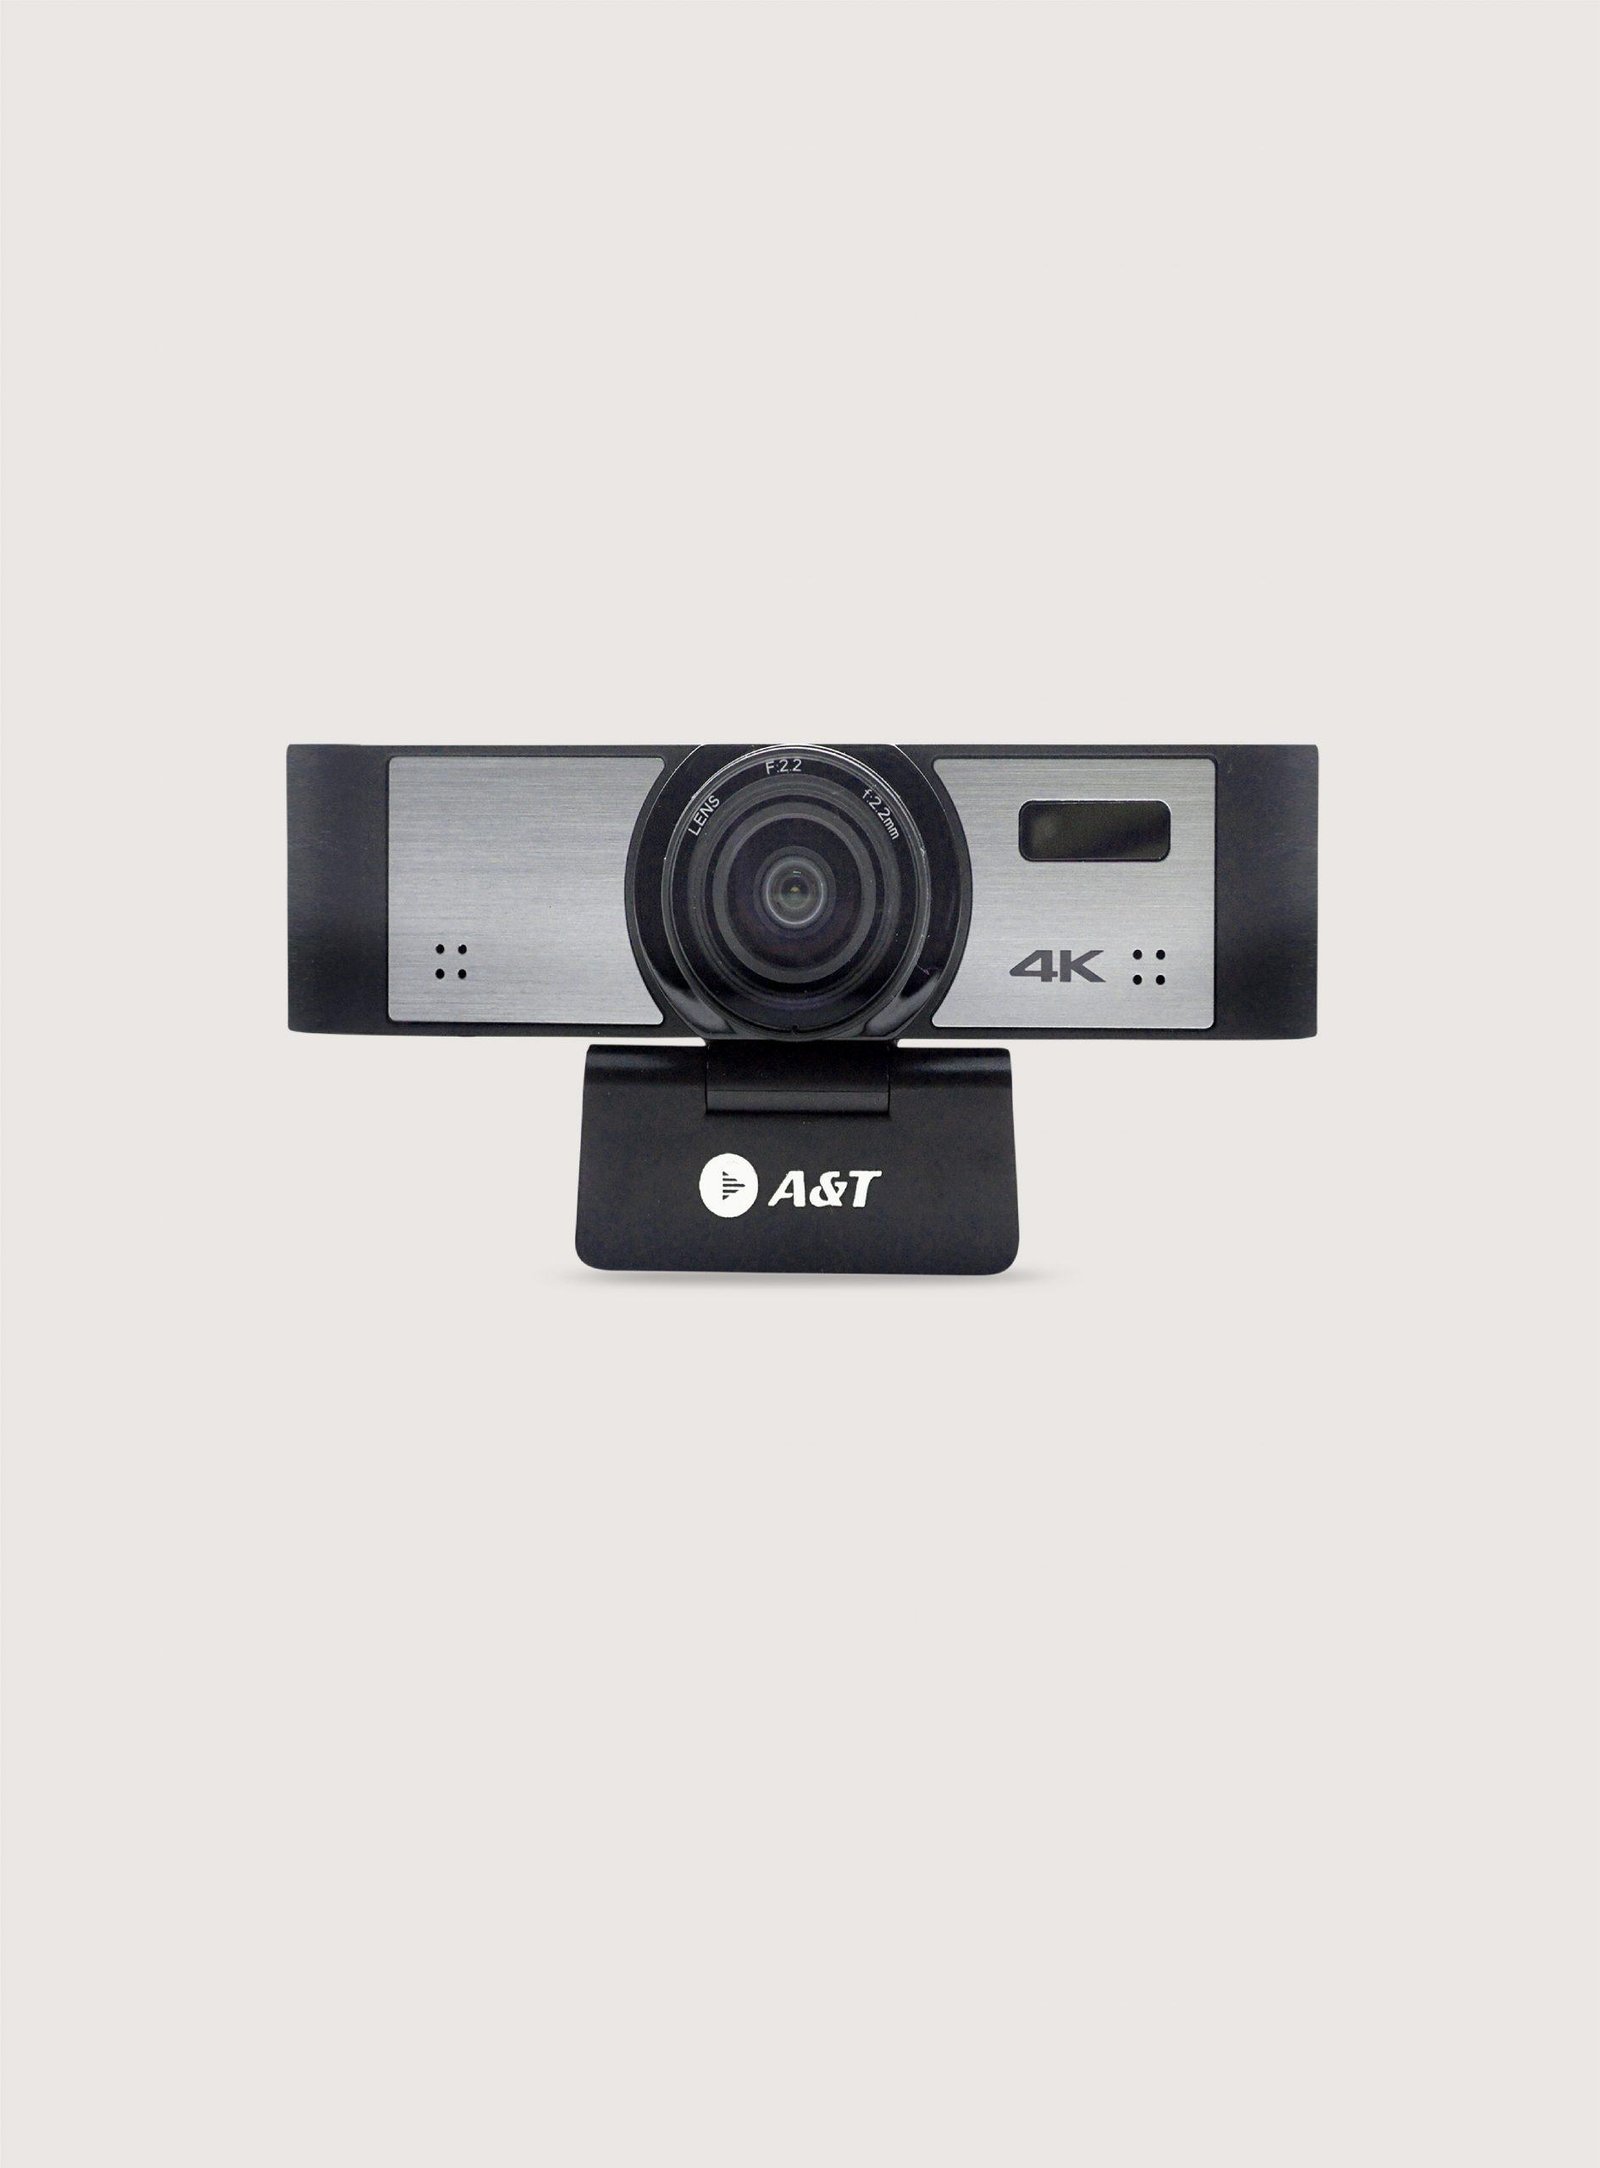 Webcams for conference rooms